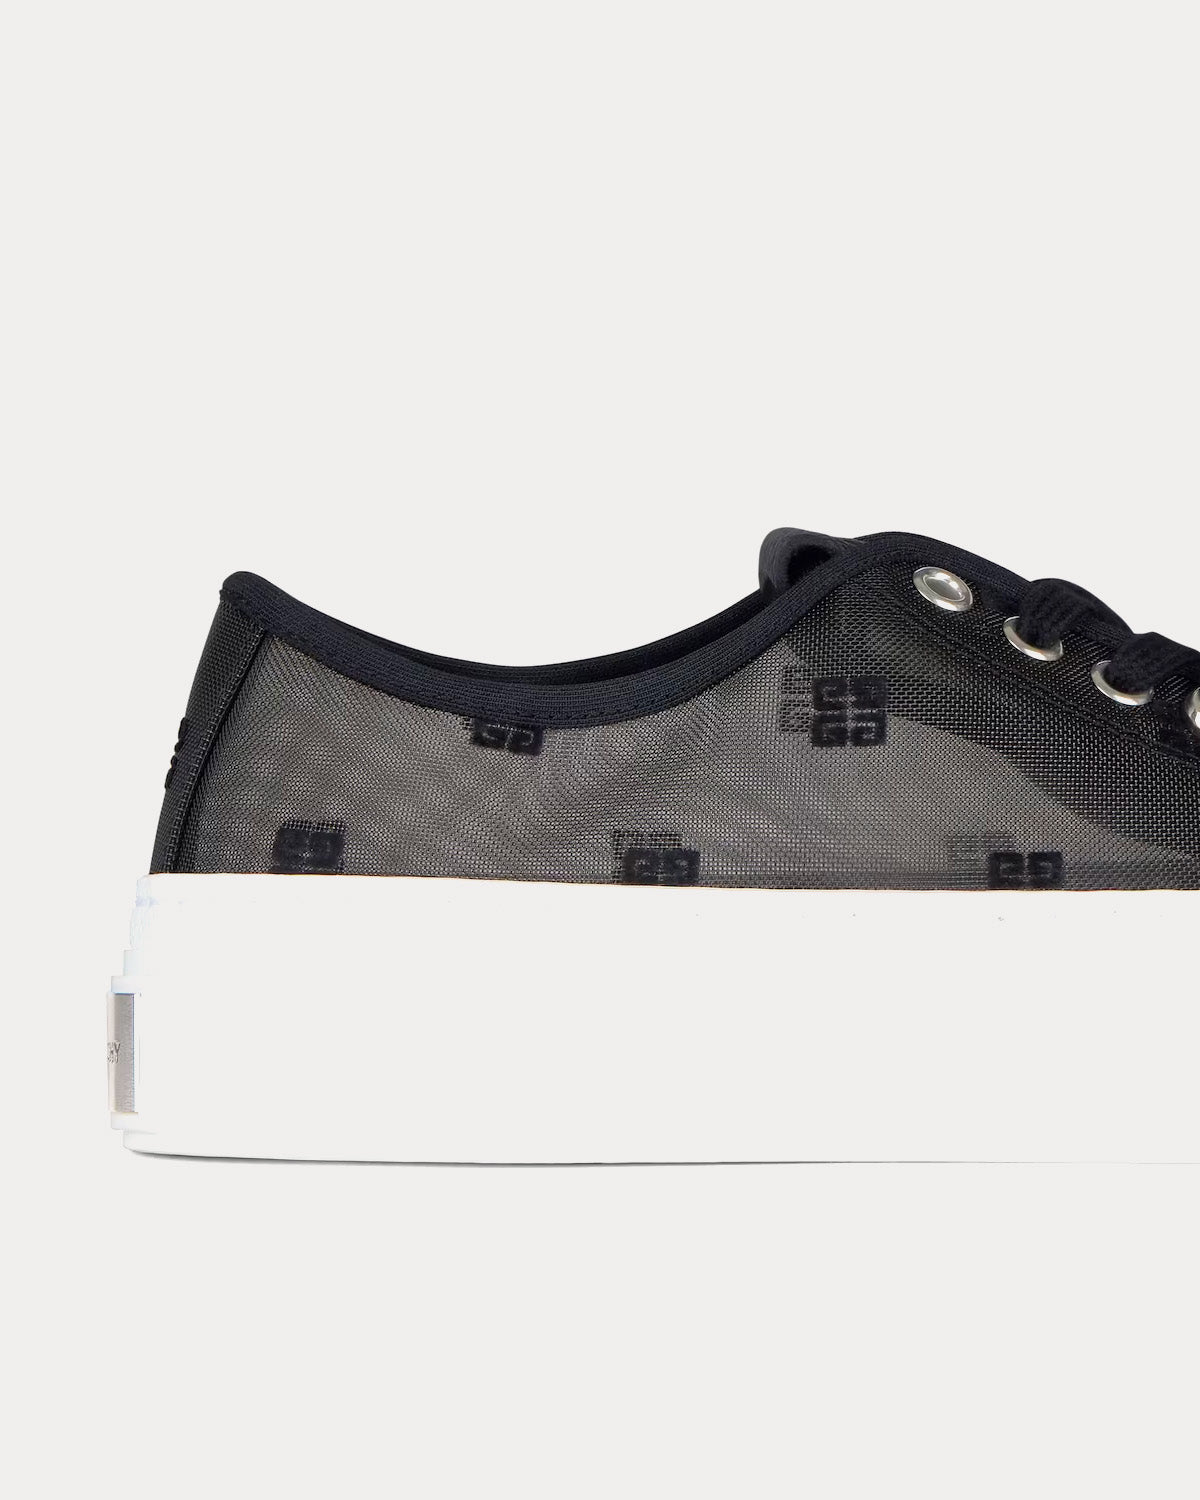 Givenchy - City 4G Transparent Mesh Black / White Low Top Sneakers